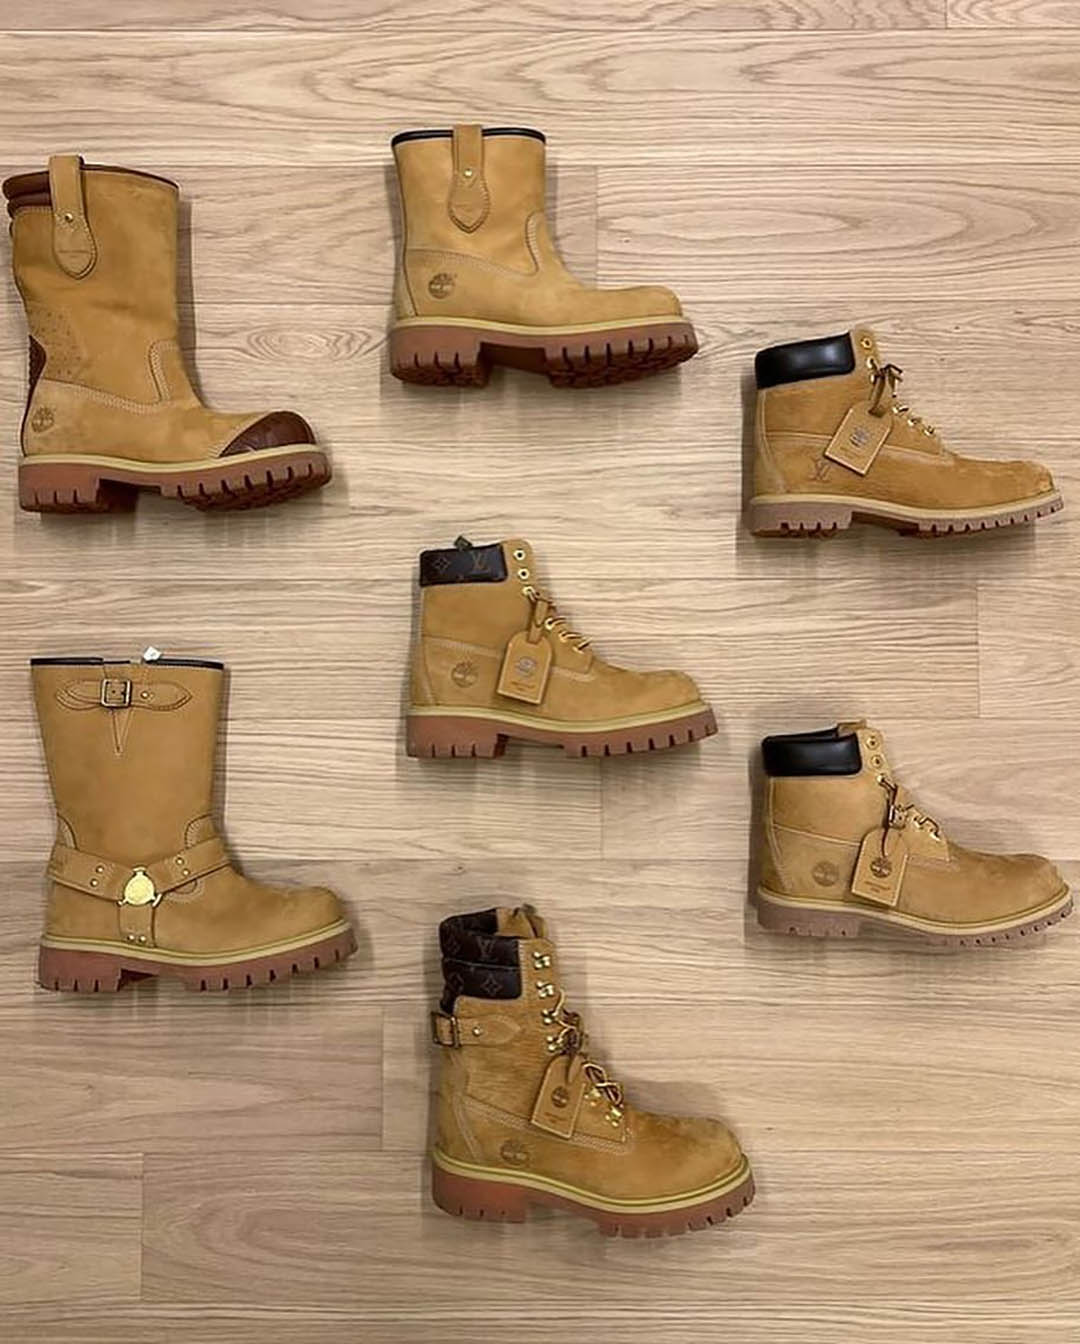 Louis Vuitton x Timberland Collection